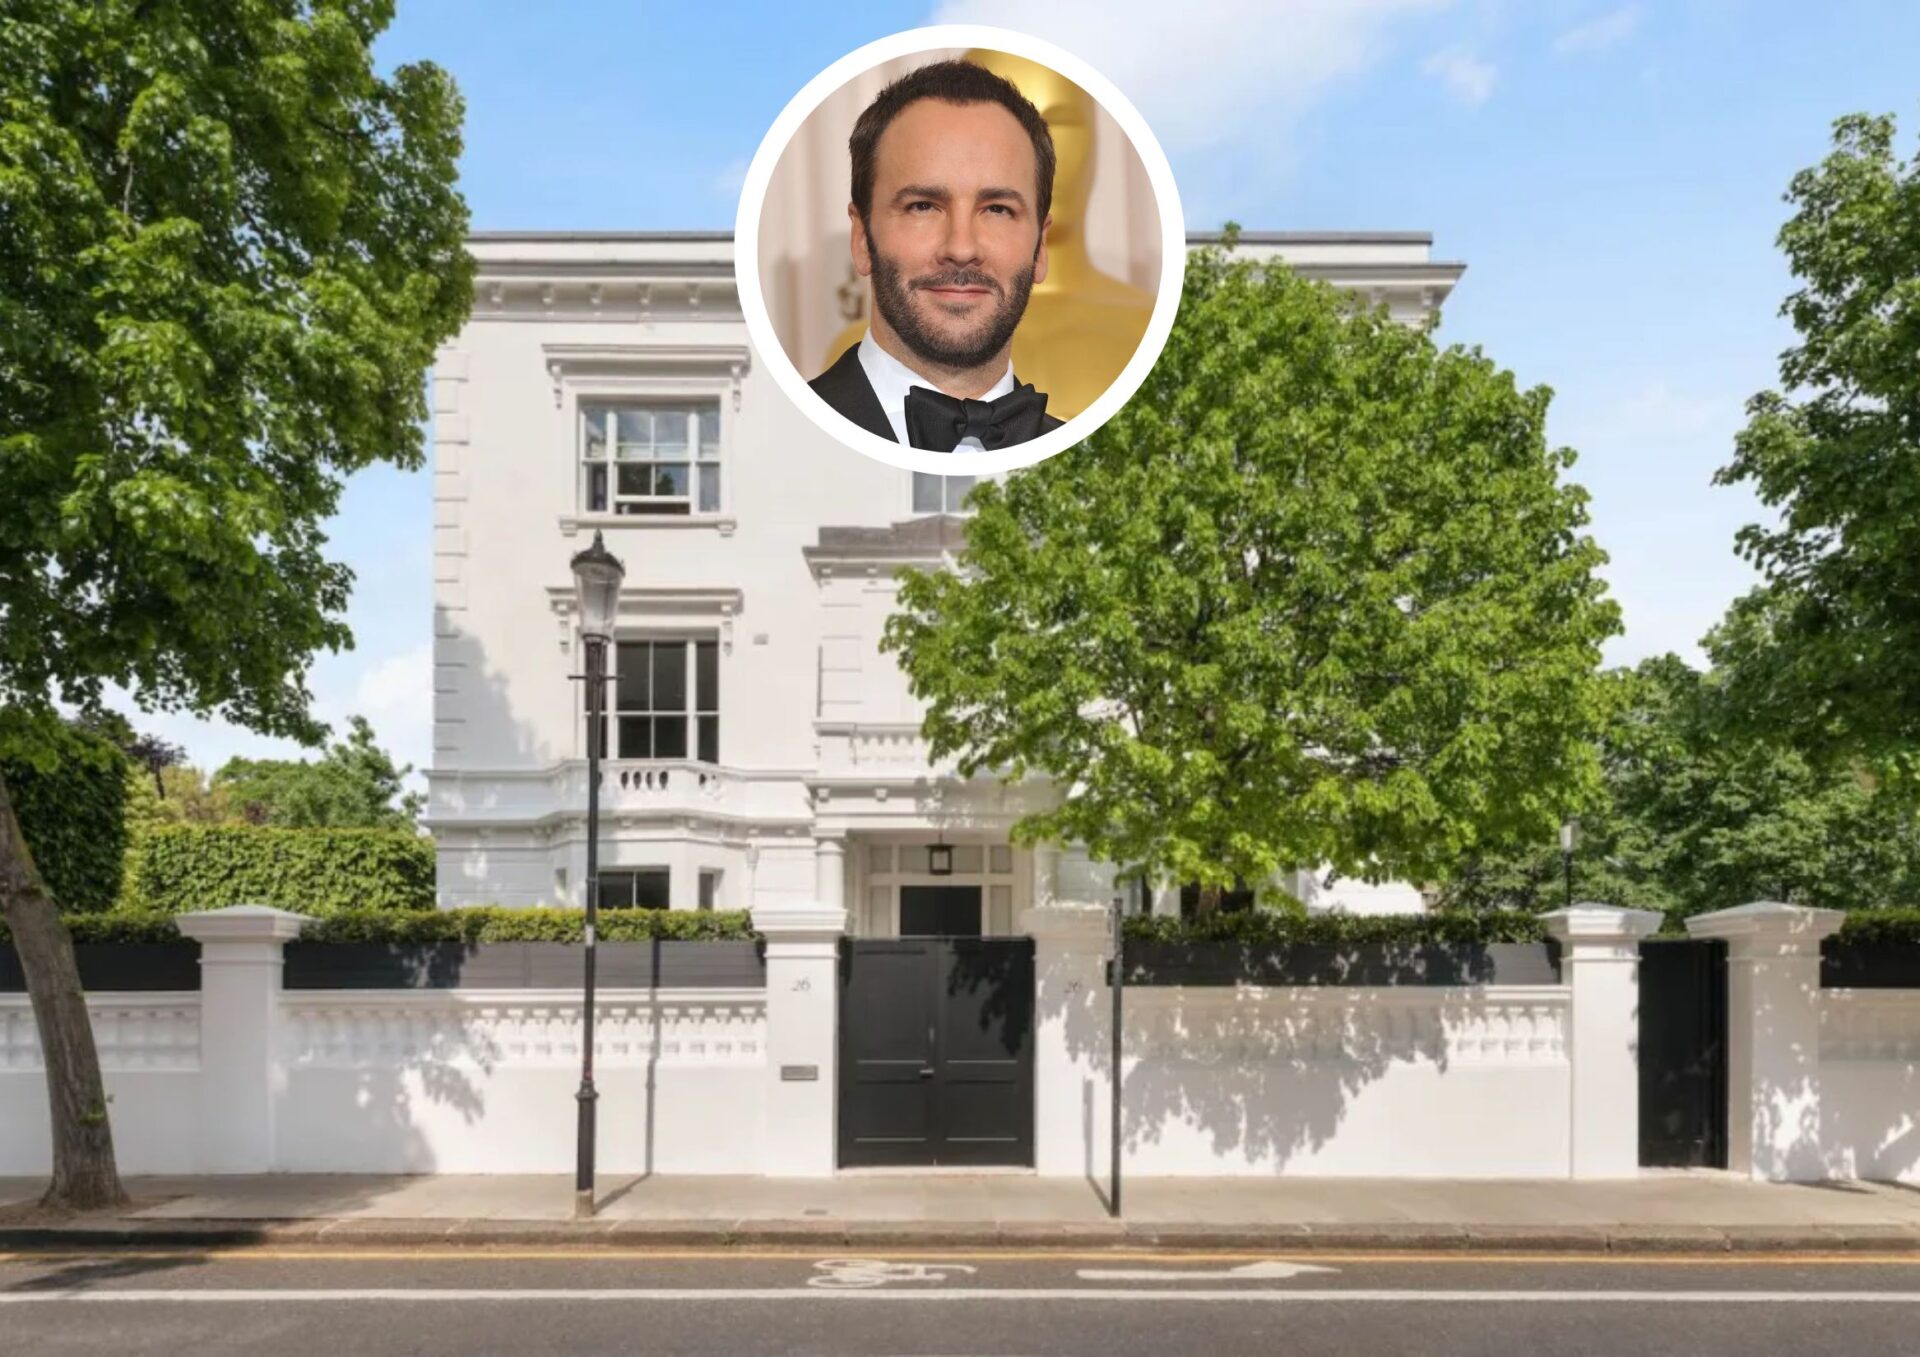 Main Image of Tom Ford's London Mansion